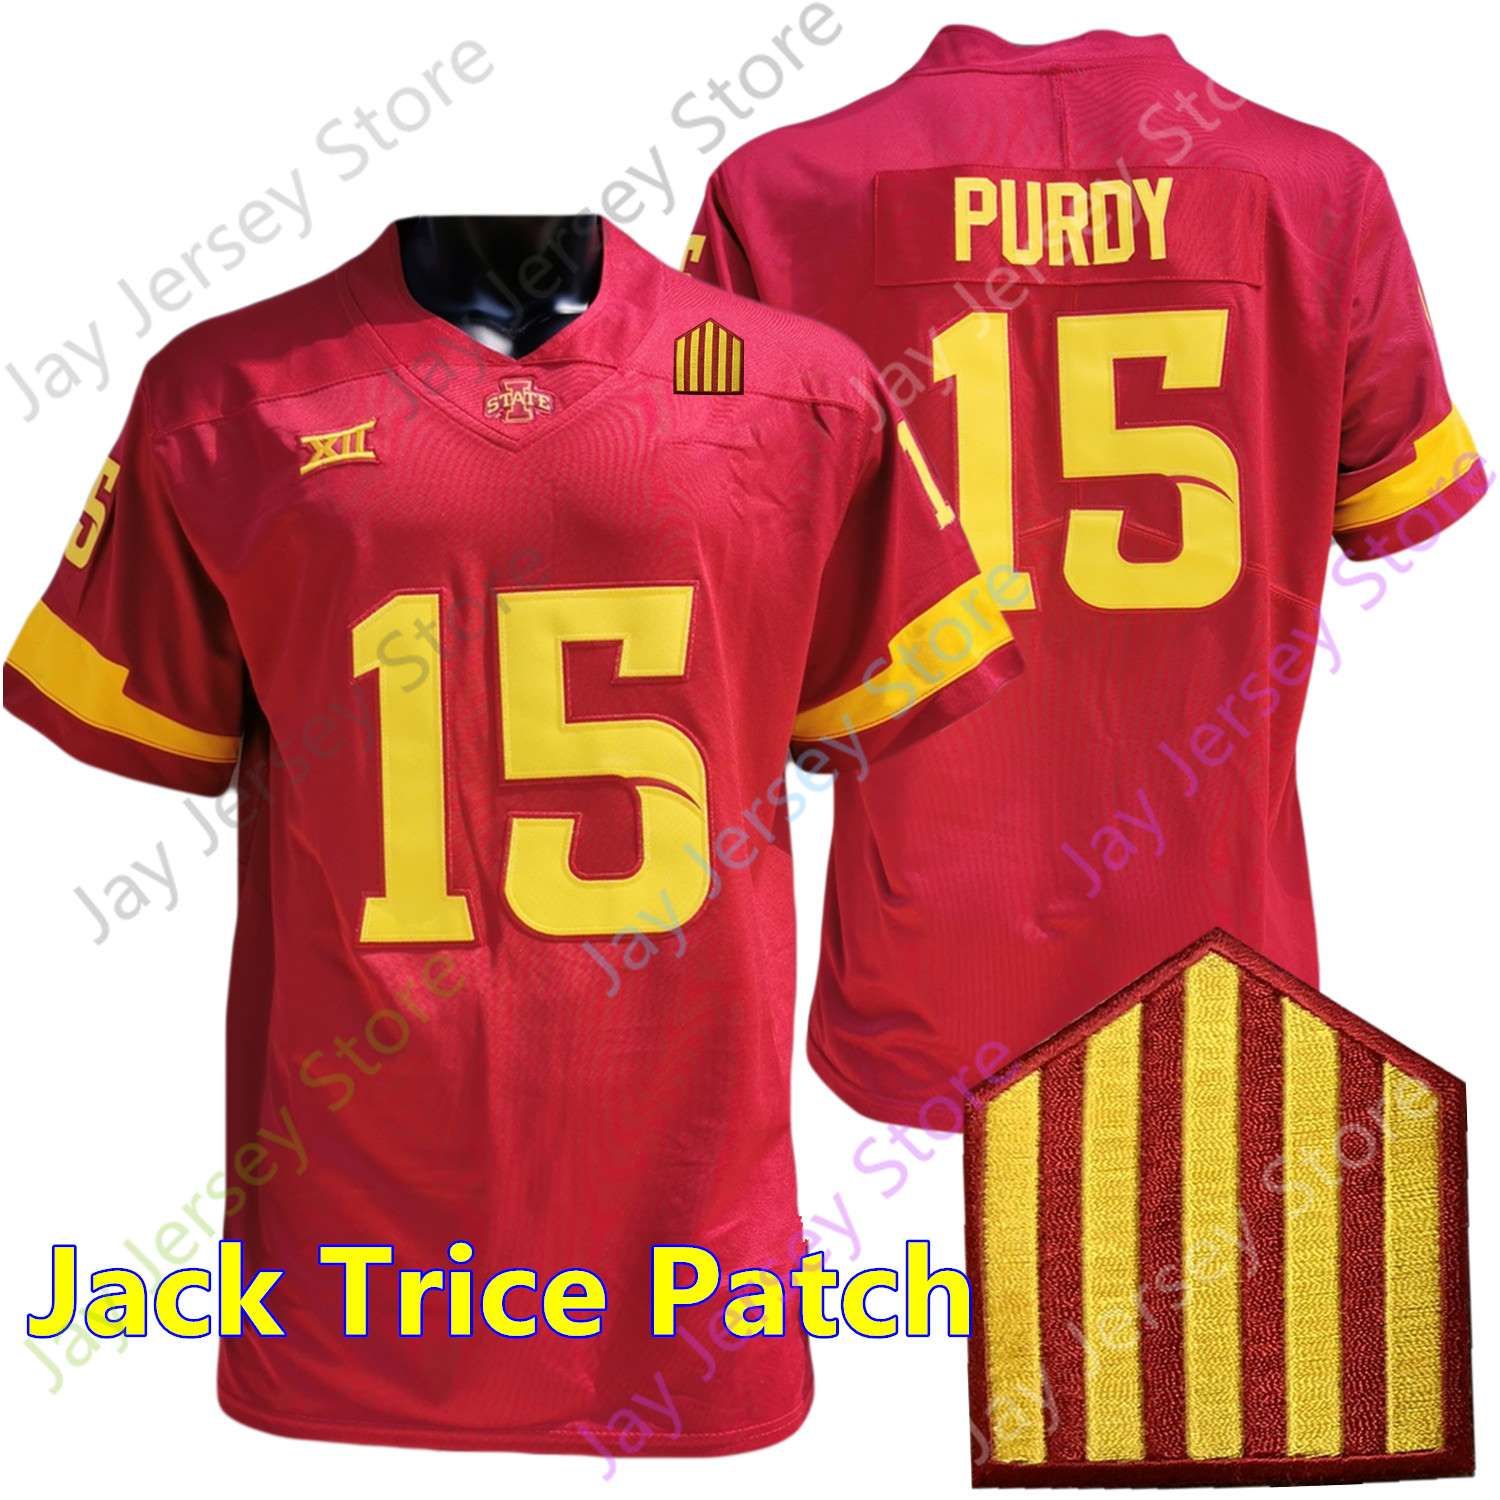 Red Jack Trice Patch